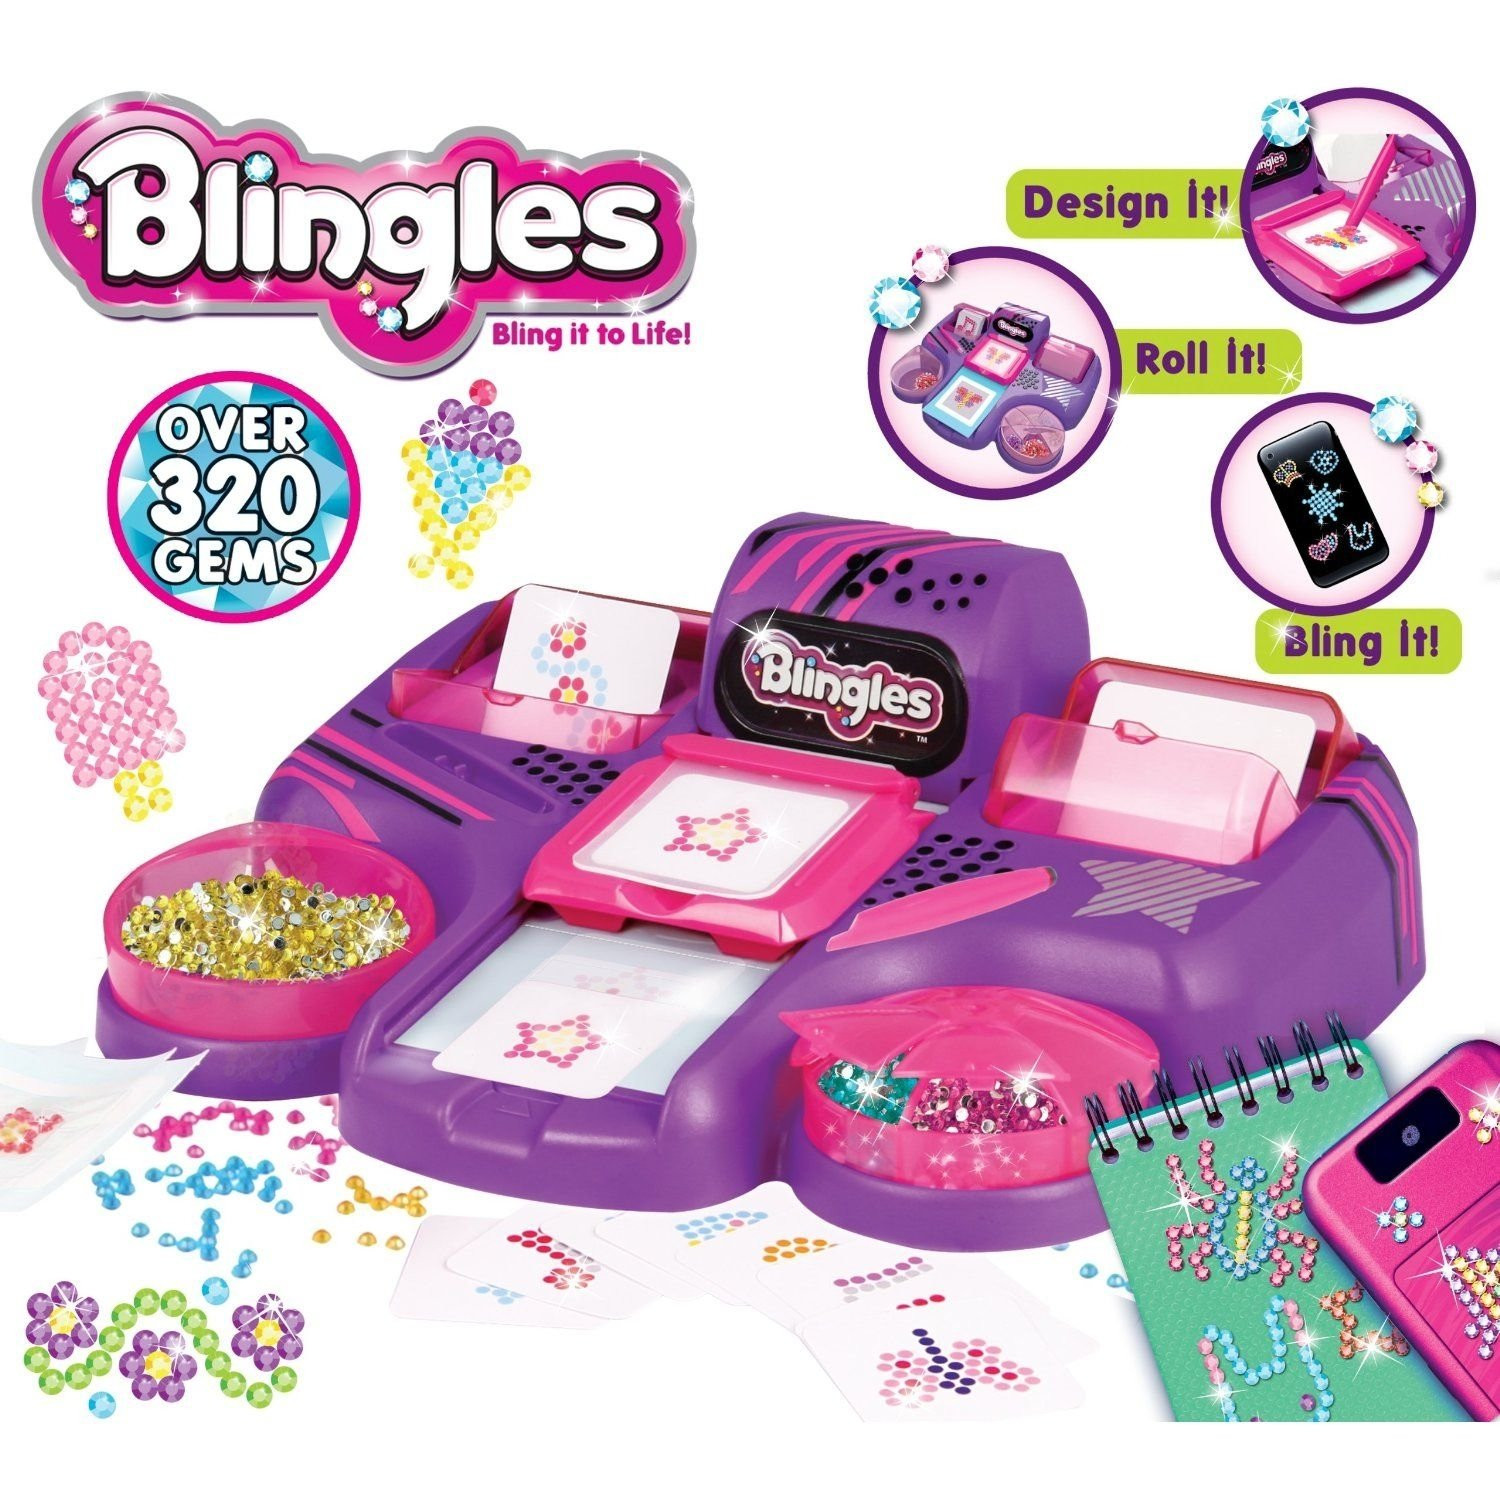 Gift Ideas for Girls Age 9 Best Of 10 Lovable Gift Ideas for Girls Age 9 2021